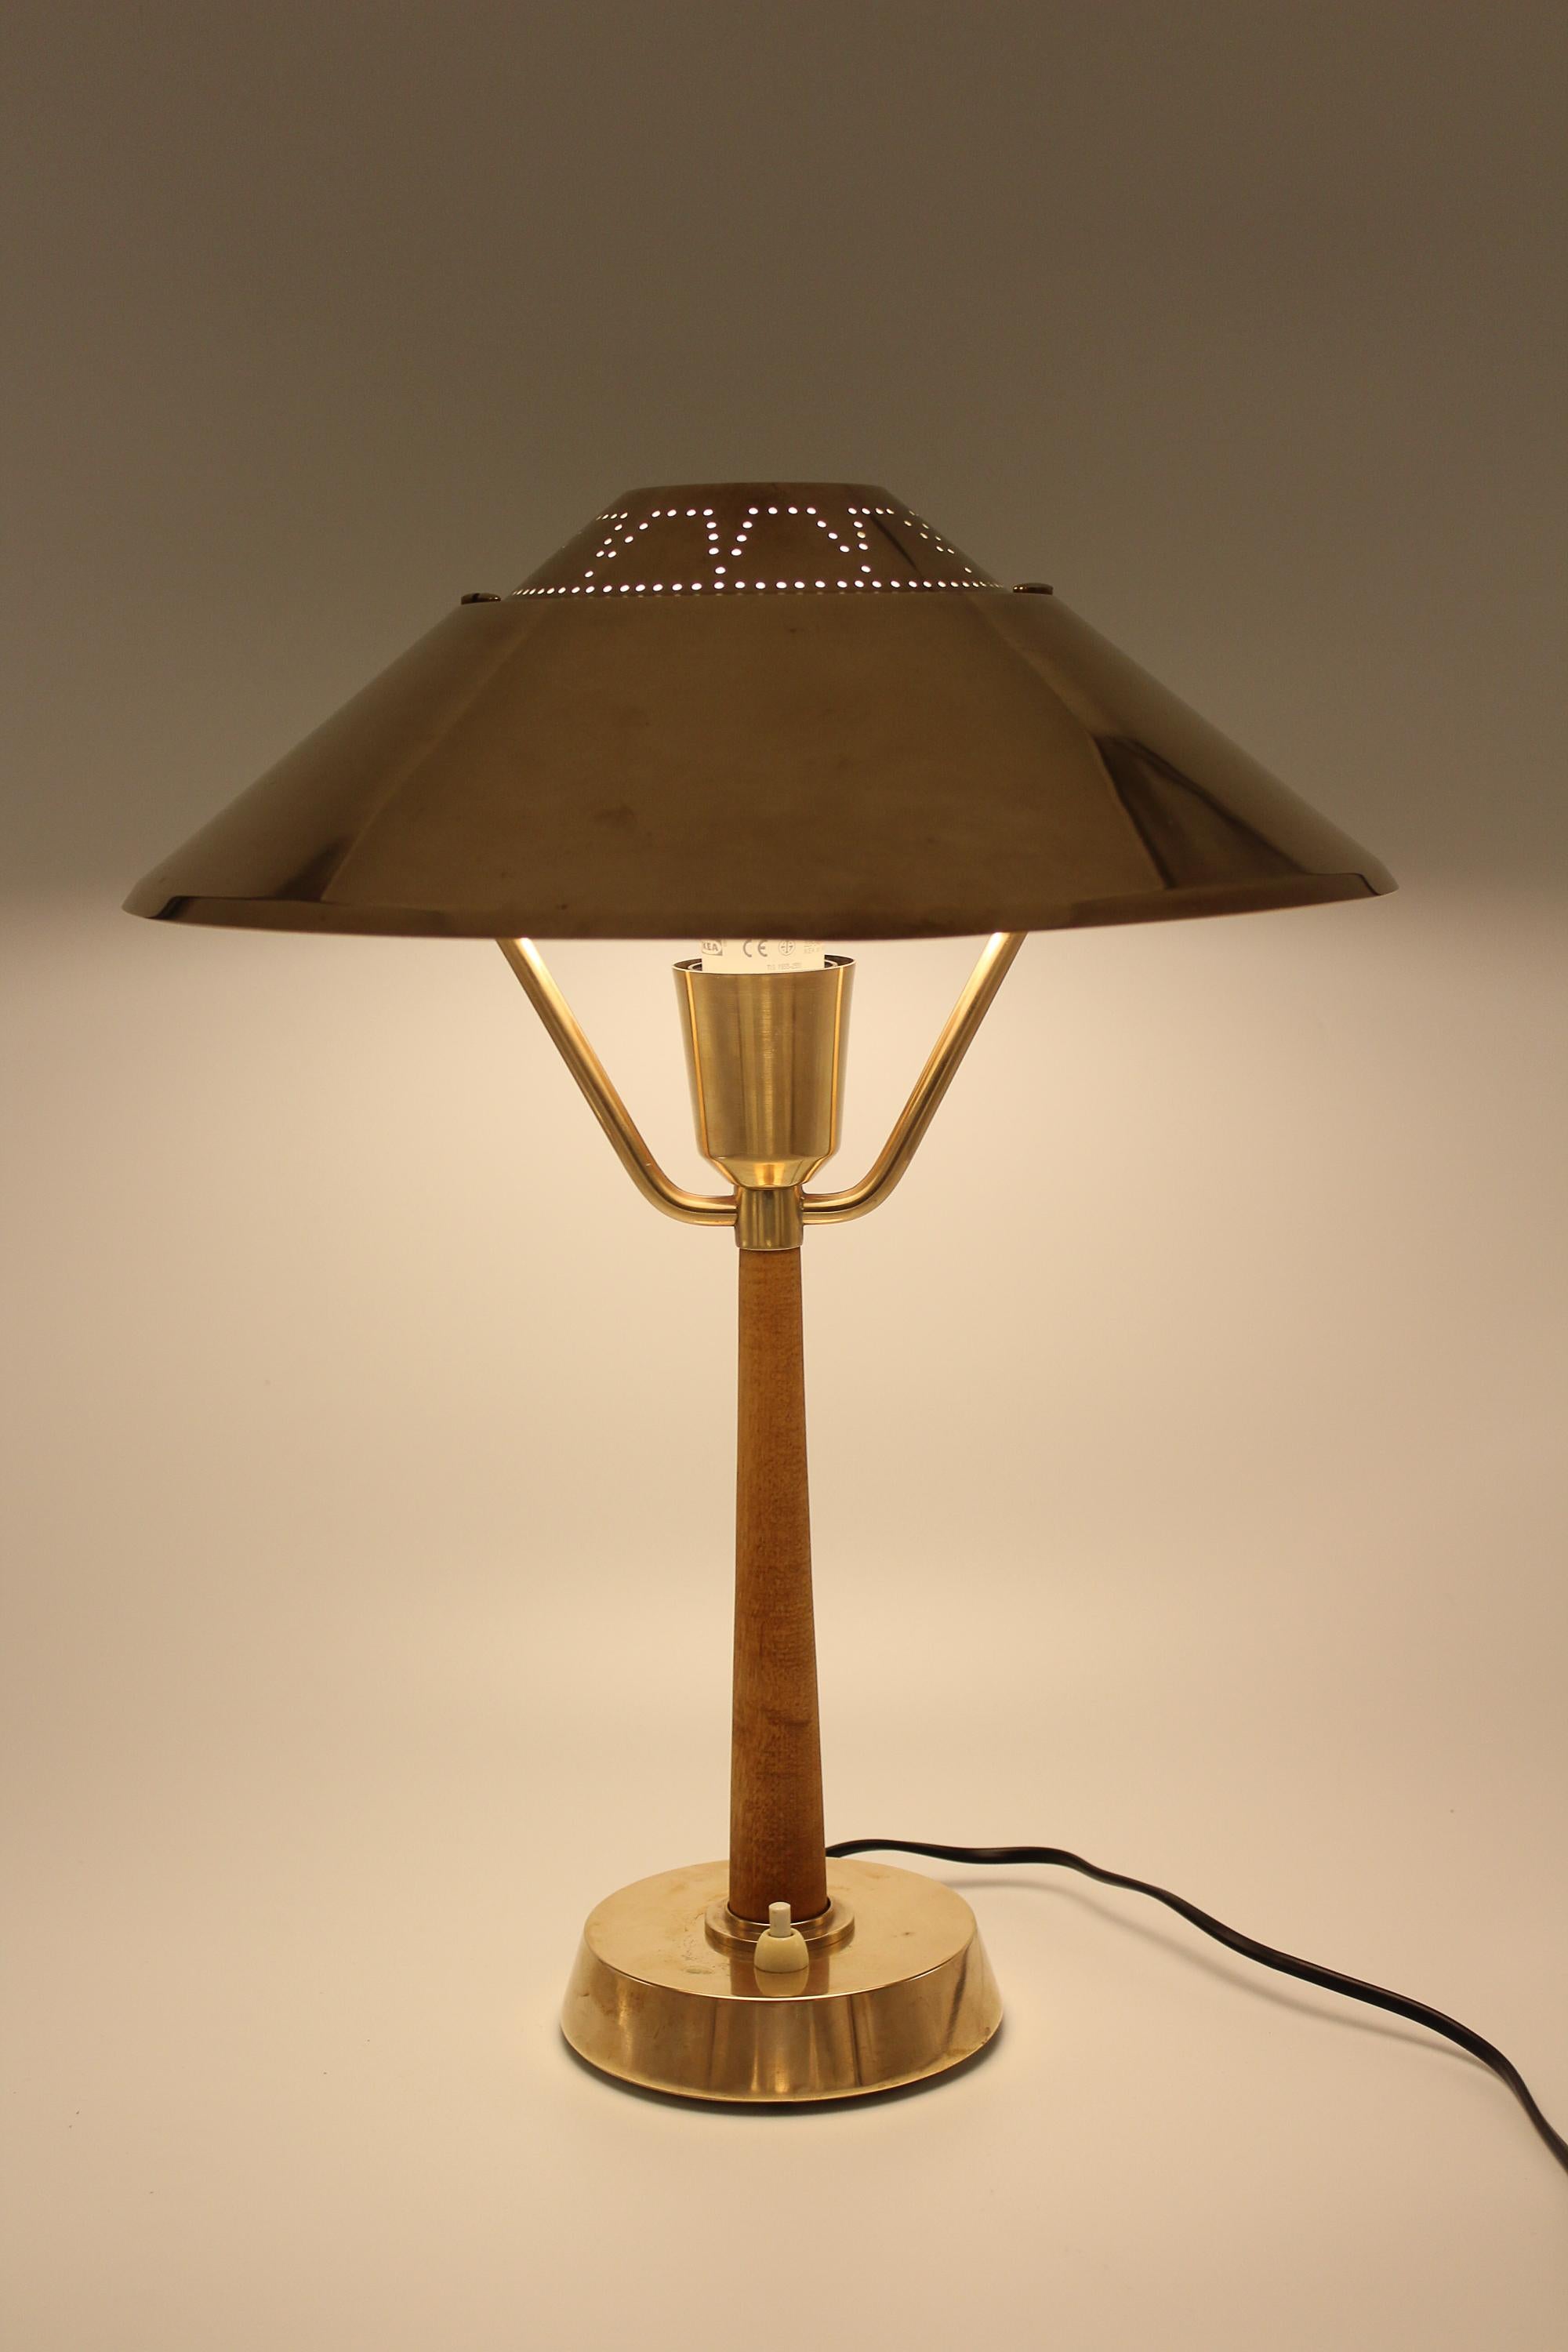 A midcentury table lamp by manufacturer AB E Hansson from Malmö, Sweden. The lamp was produced in the 1940s and is made out of brass and stained beech. Very good vintage condition with patina consistent with age and rewired.